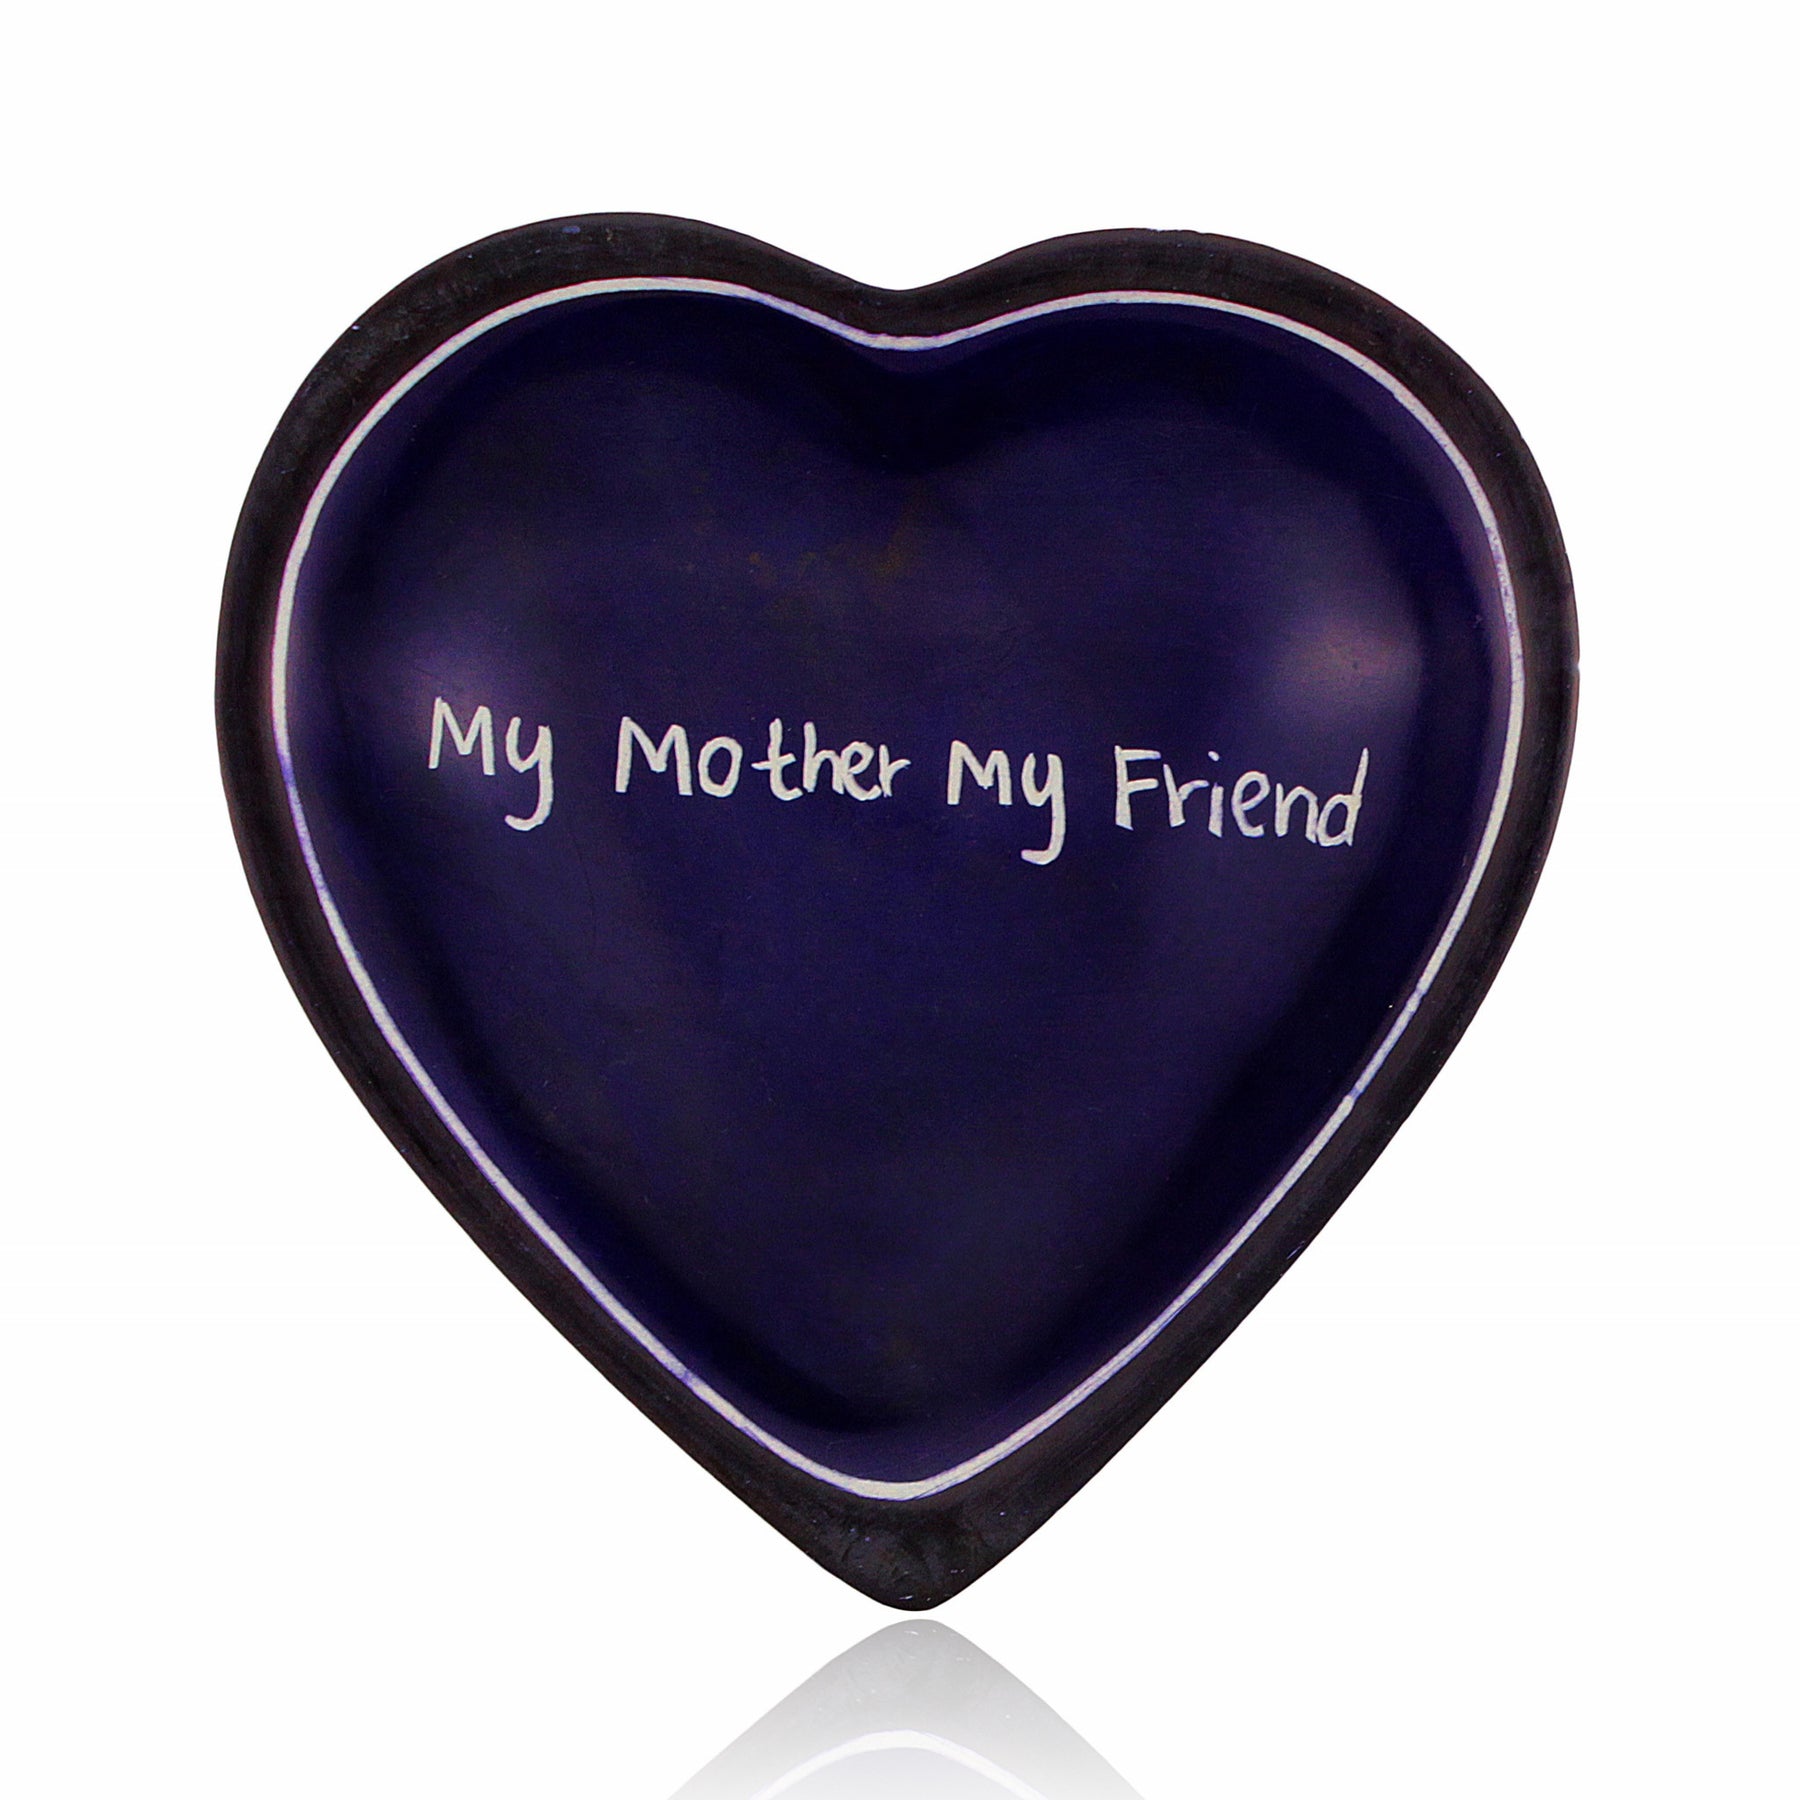 1 of 2: My Mother, My Friend Kenyan Heart Shaped Soapstone Dish by Venture Imports